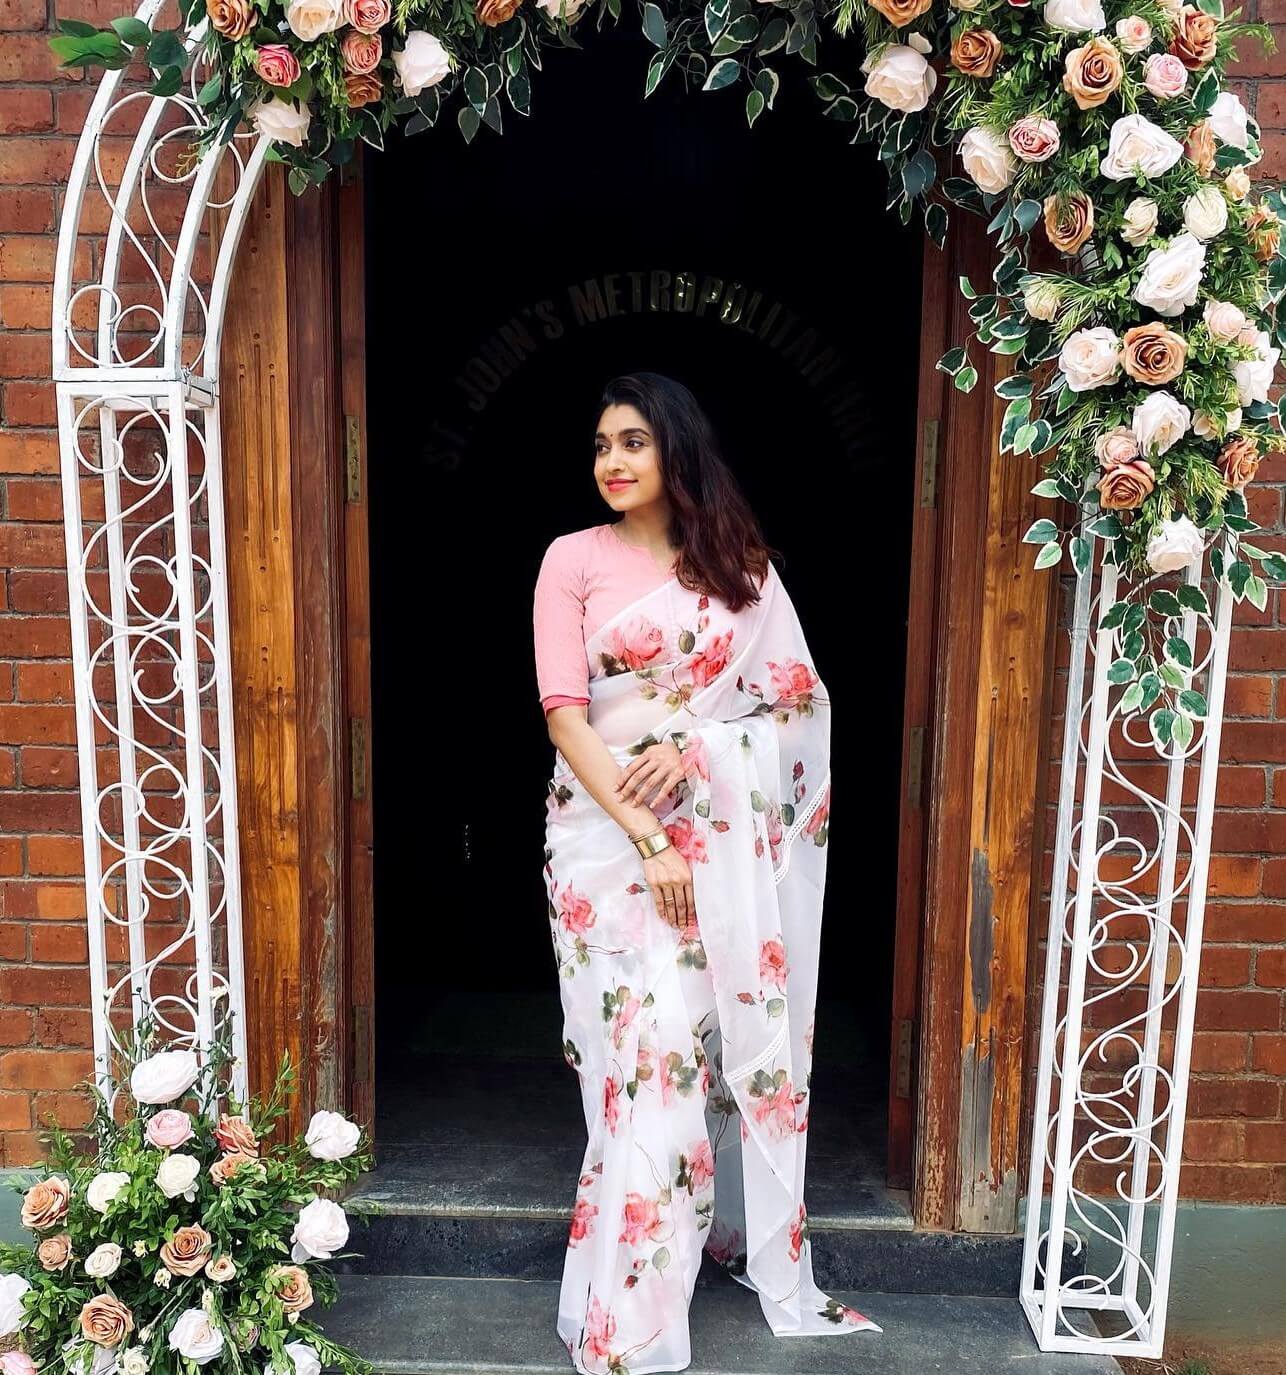 Sija Rose Draped In White Floral Printed Georgette Saree With Pink Blouse Perfect Day Wedding Look